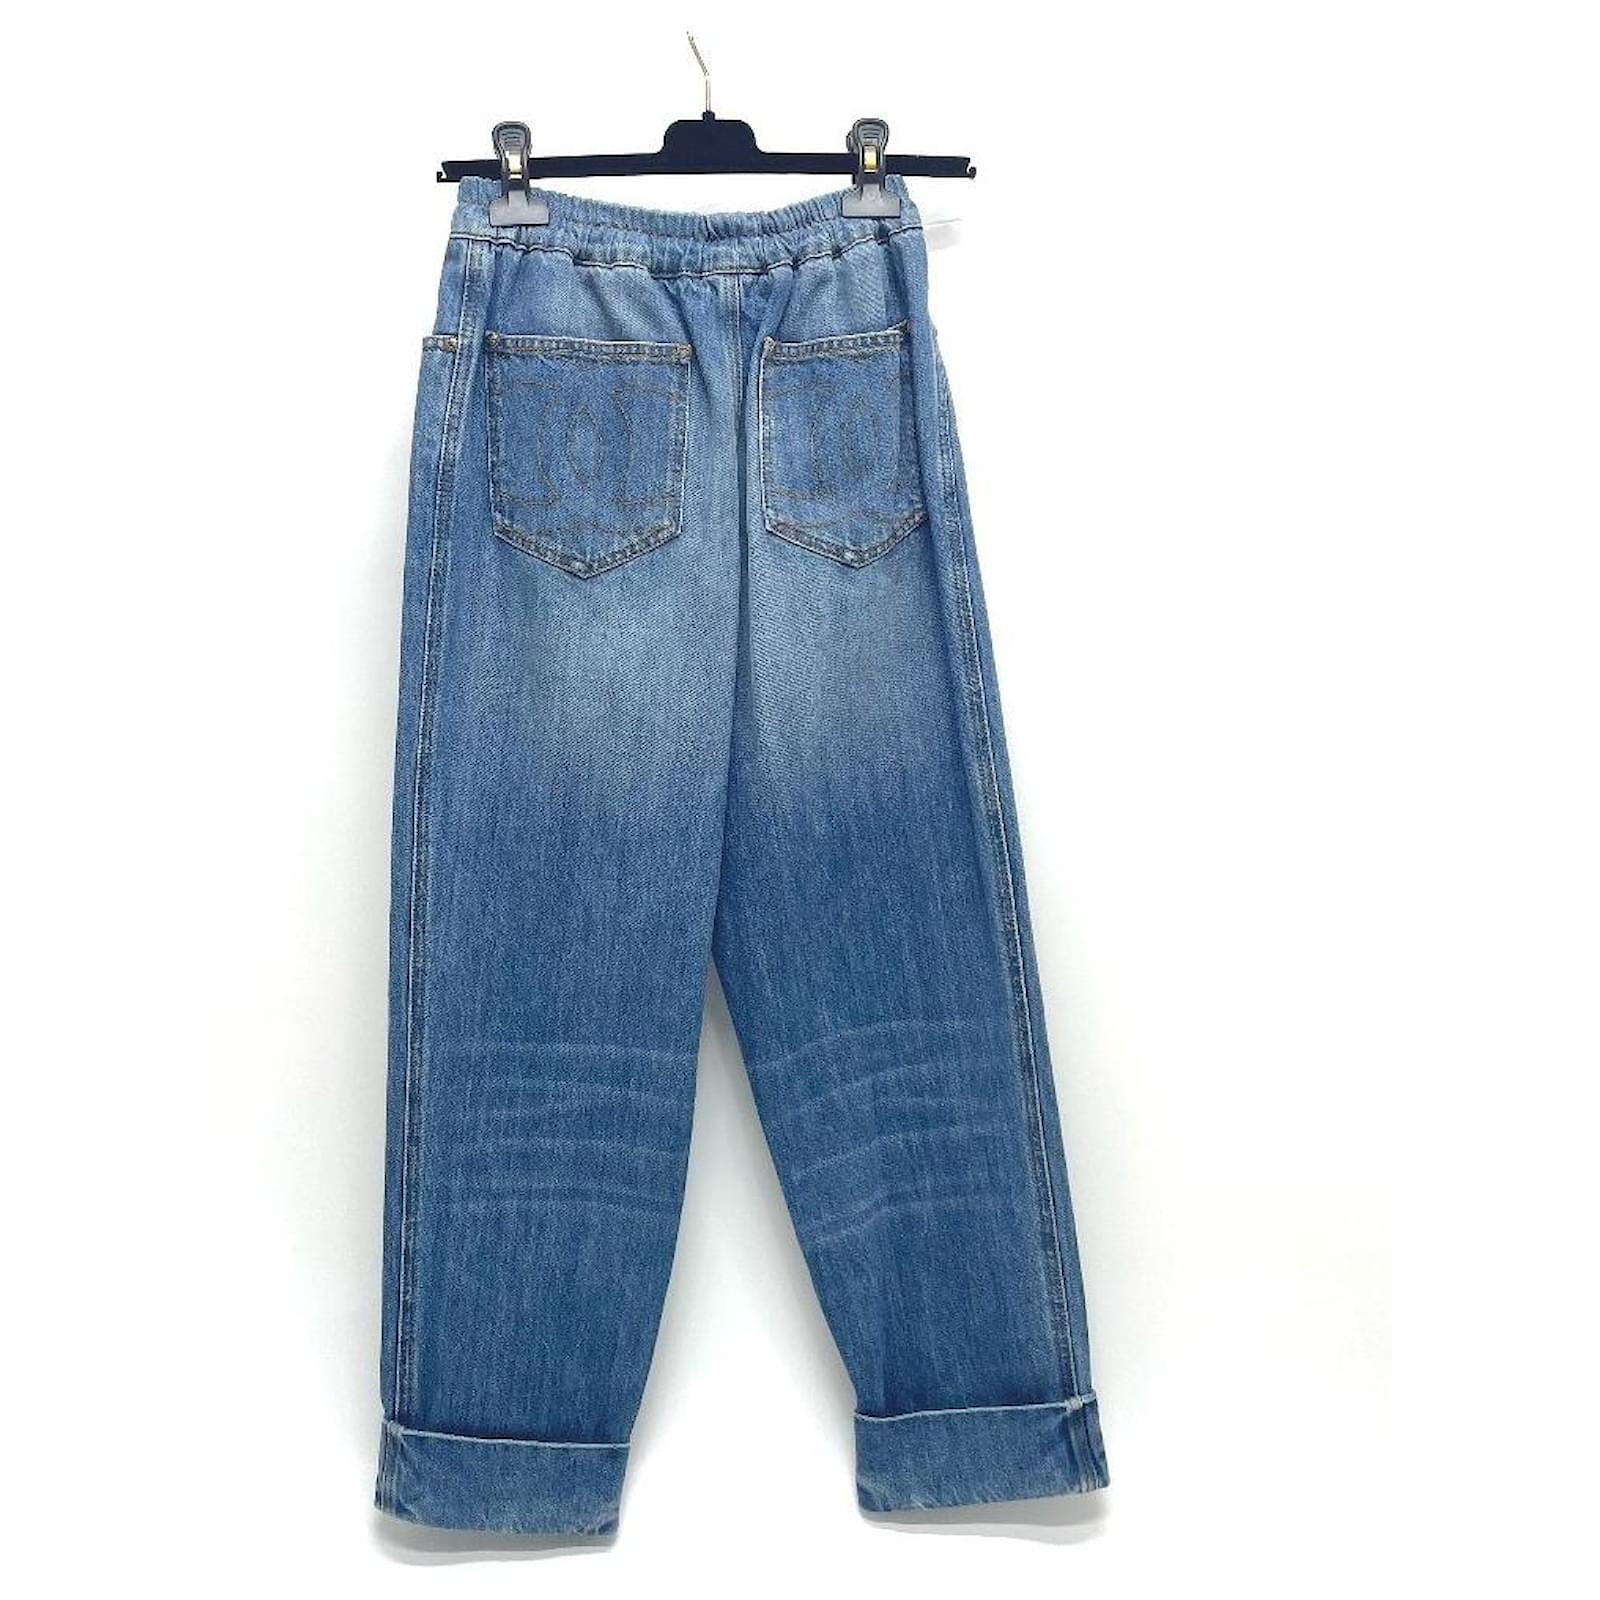 CHANEL BD249 CC Coco Mark 18A Roll Up Bottoms Jeans Denim Pants